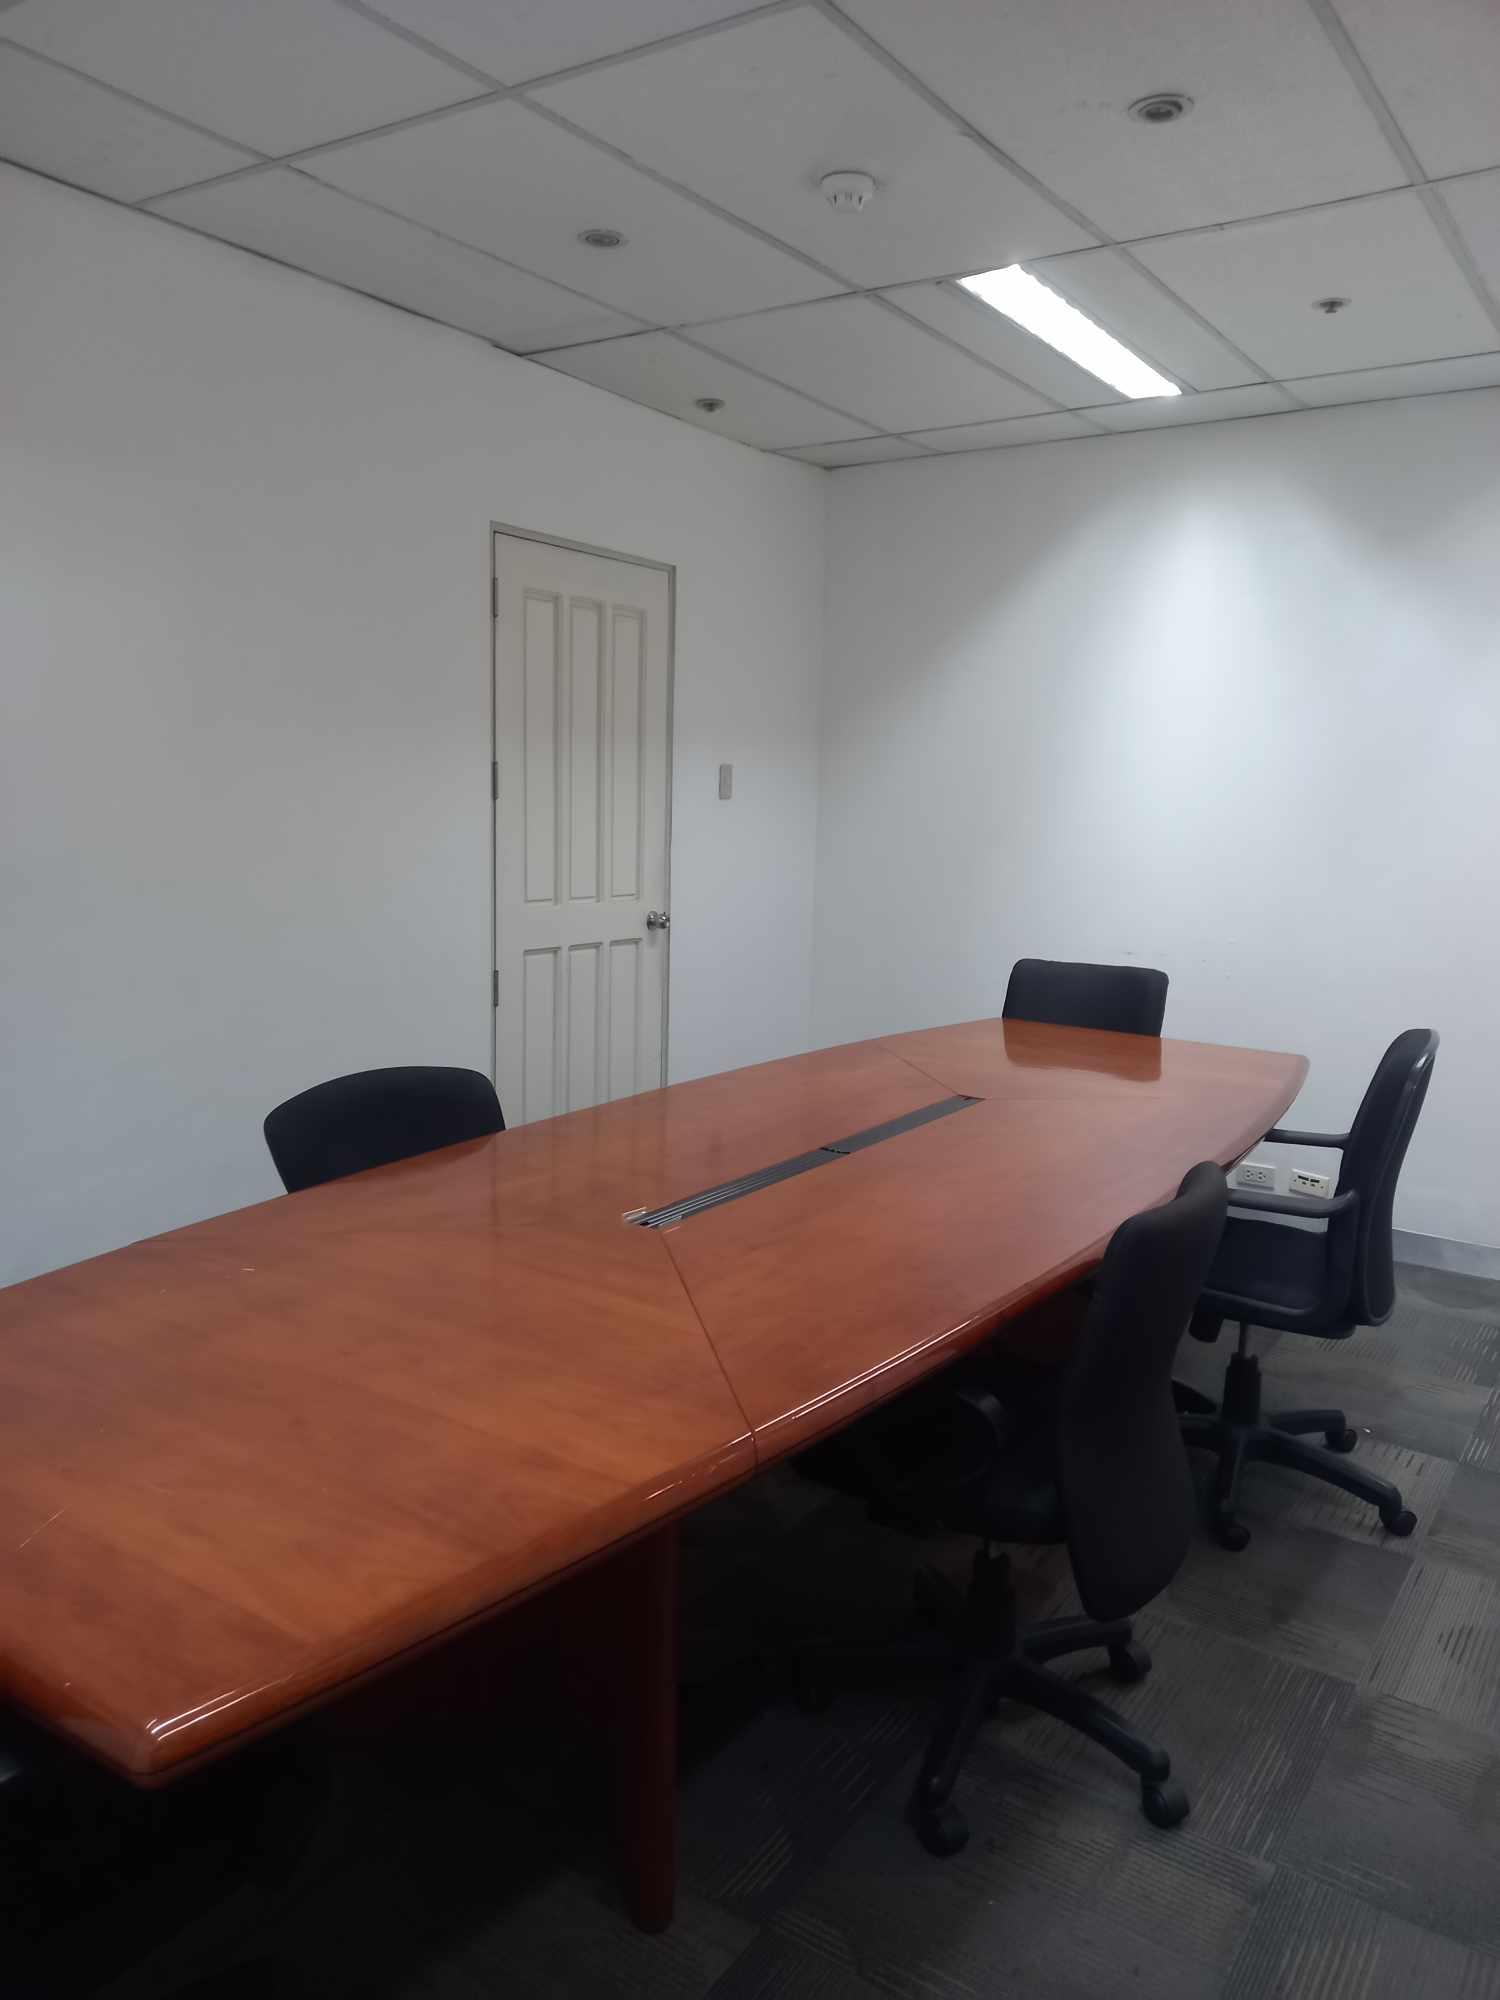 For Rent Lease Fitted 225 sqm Office Space Ortigas Pasig